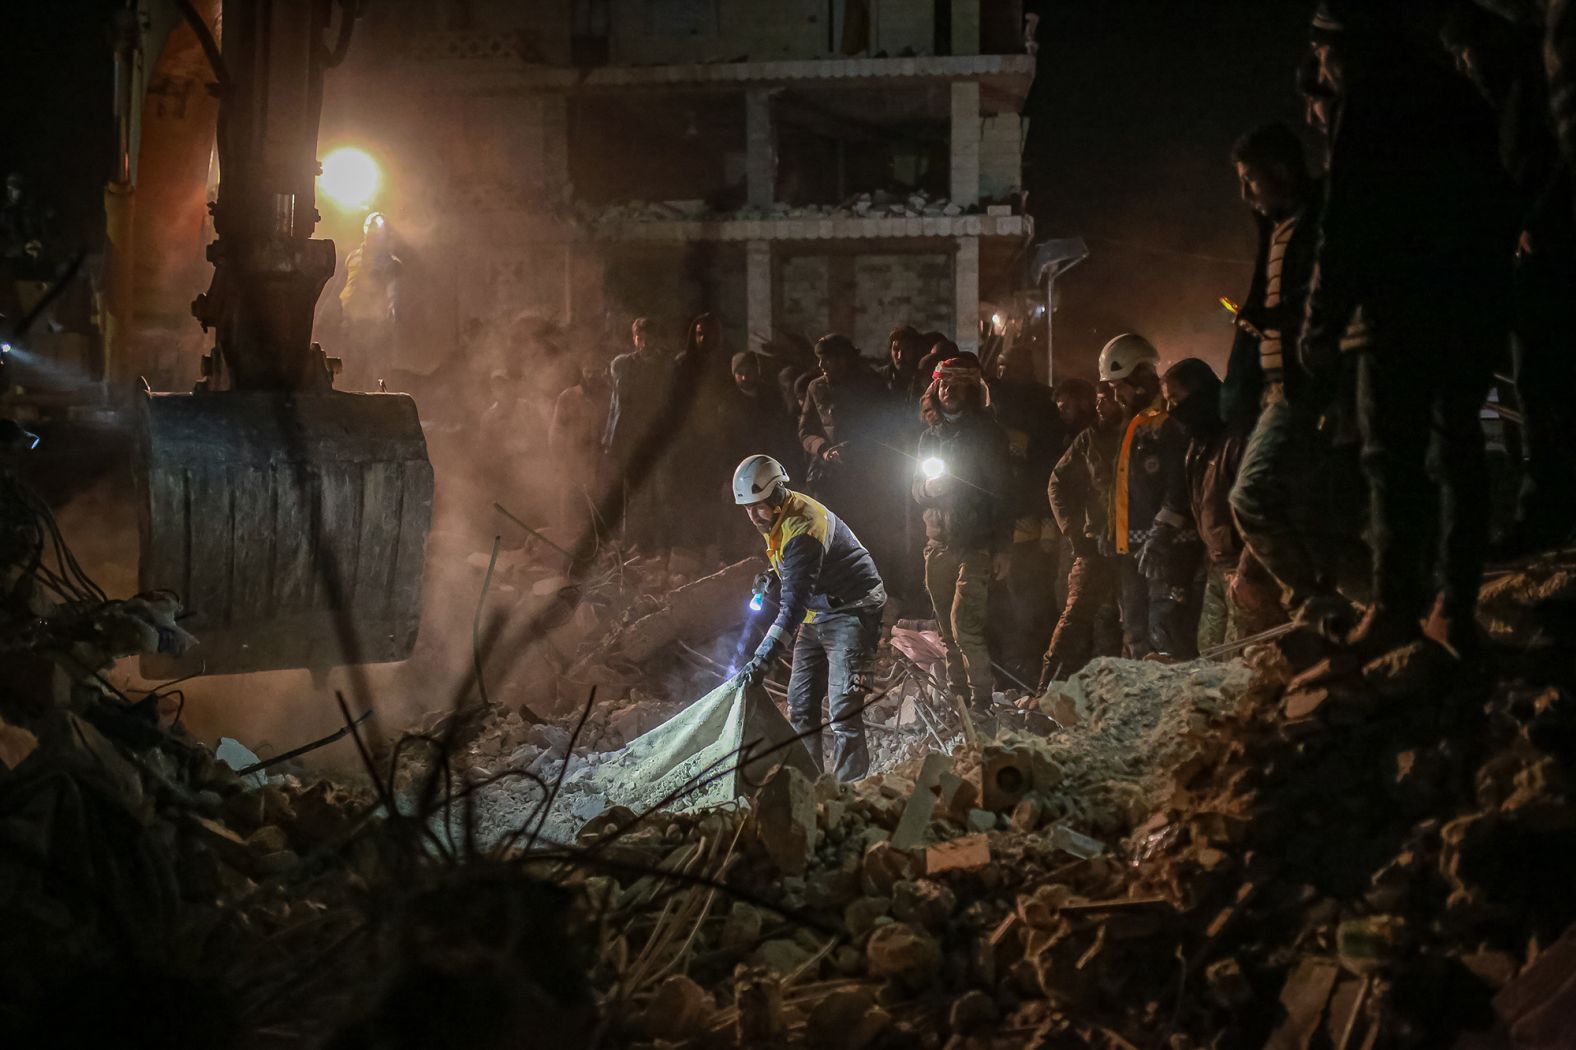 Search-and-rescue efforts continue in Aleppo on February 8.